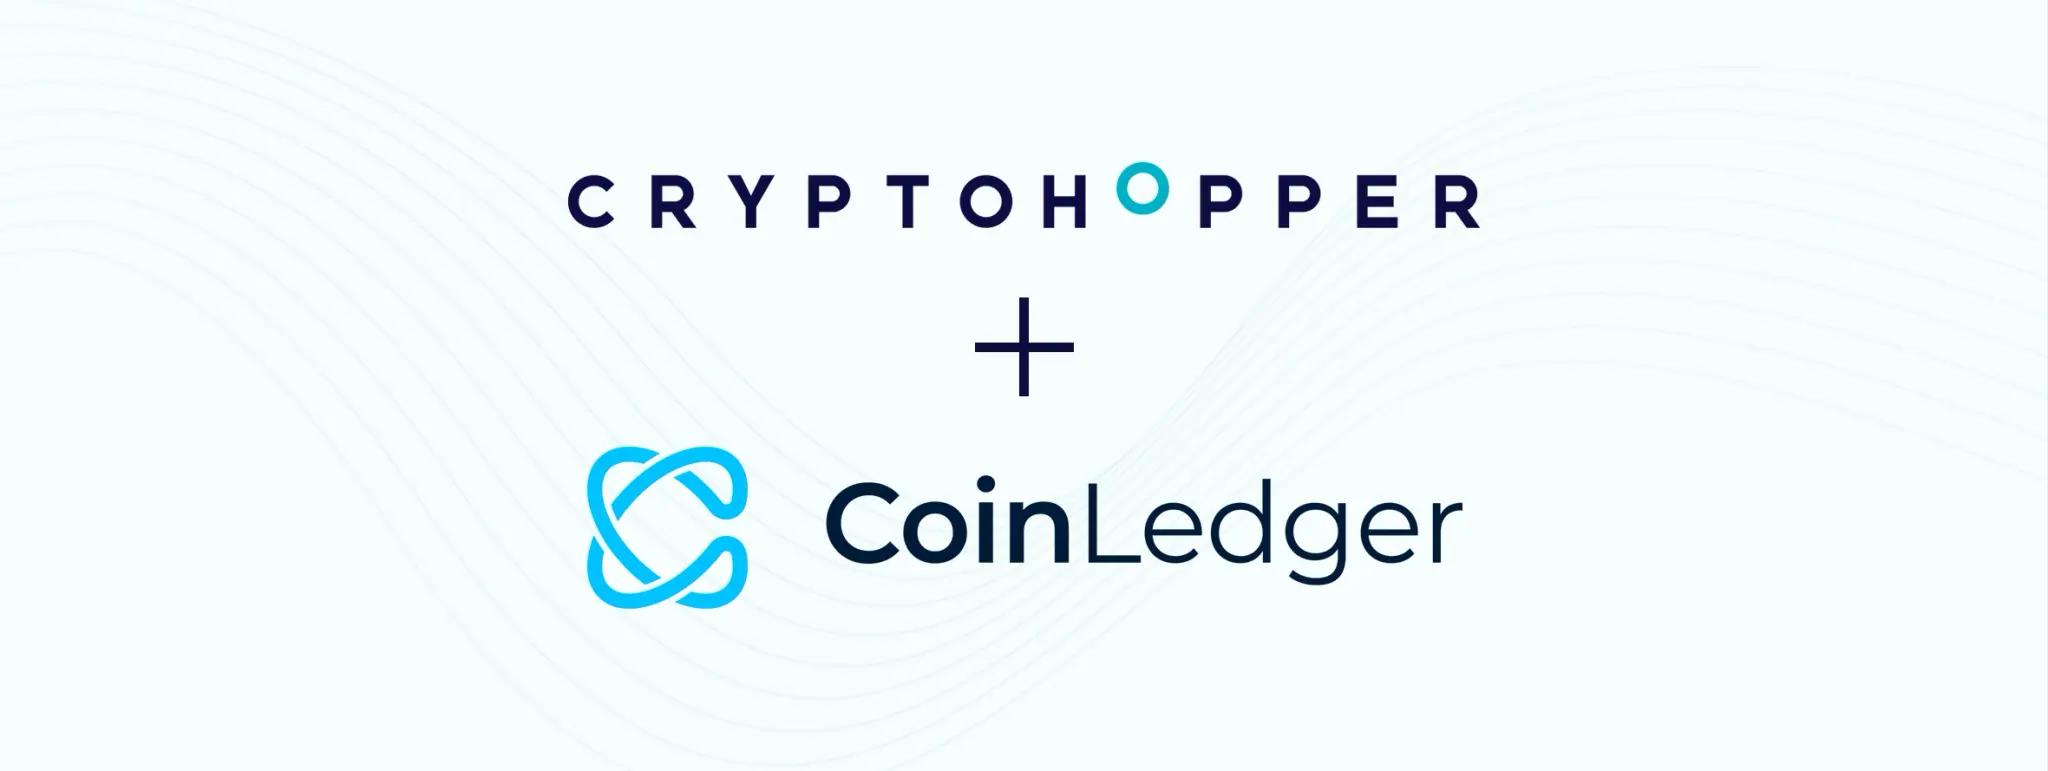 Crypto Trading 101 | CoinLedger – An Introduction